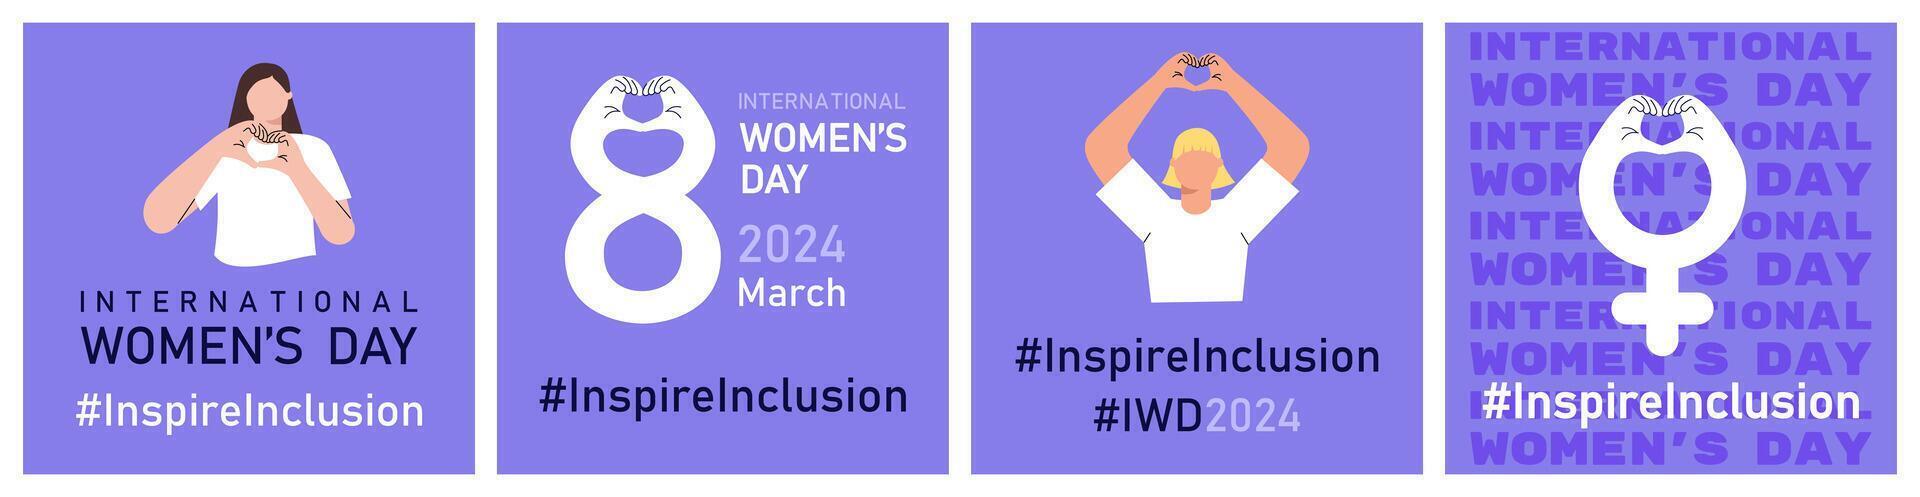 Inspire inclusion banners set Women's day vector illustration